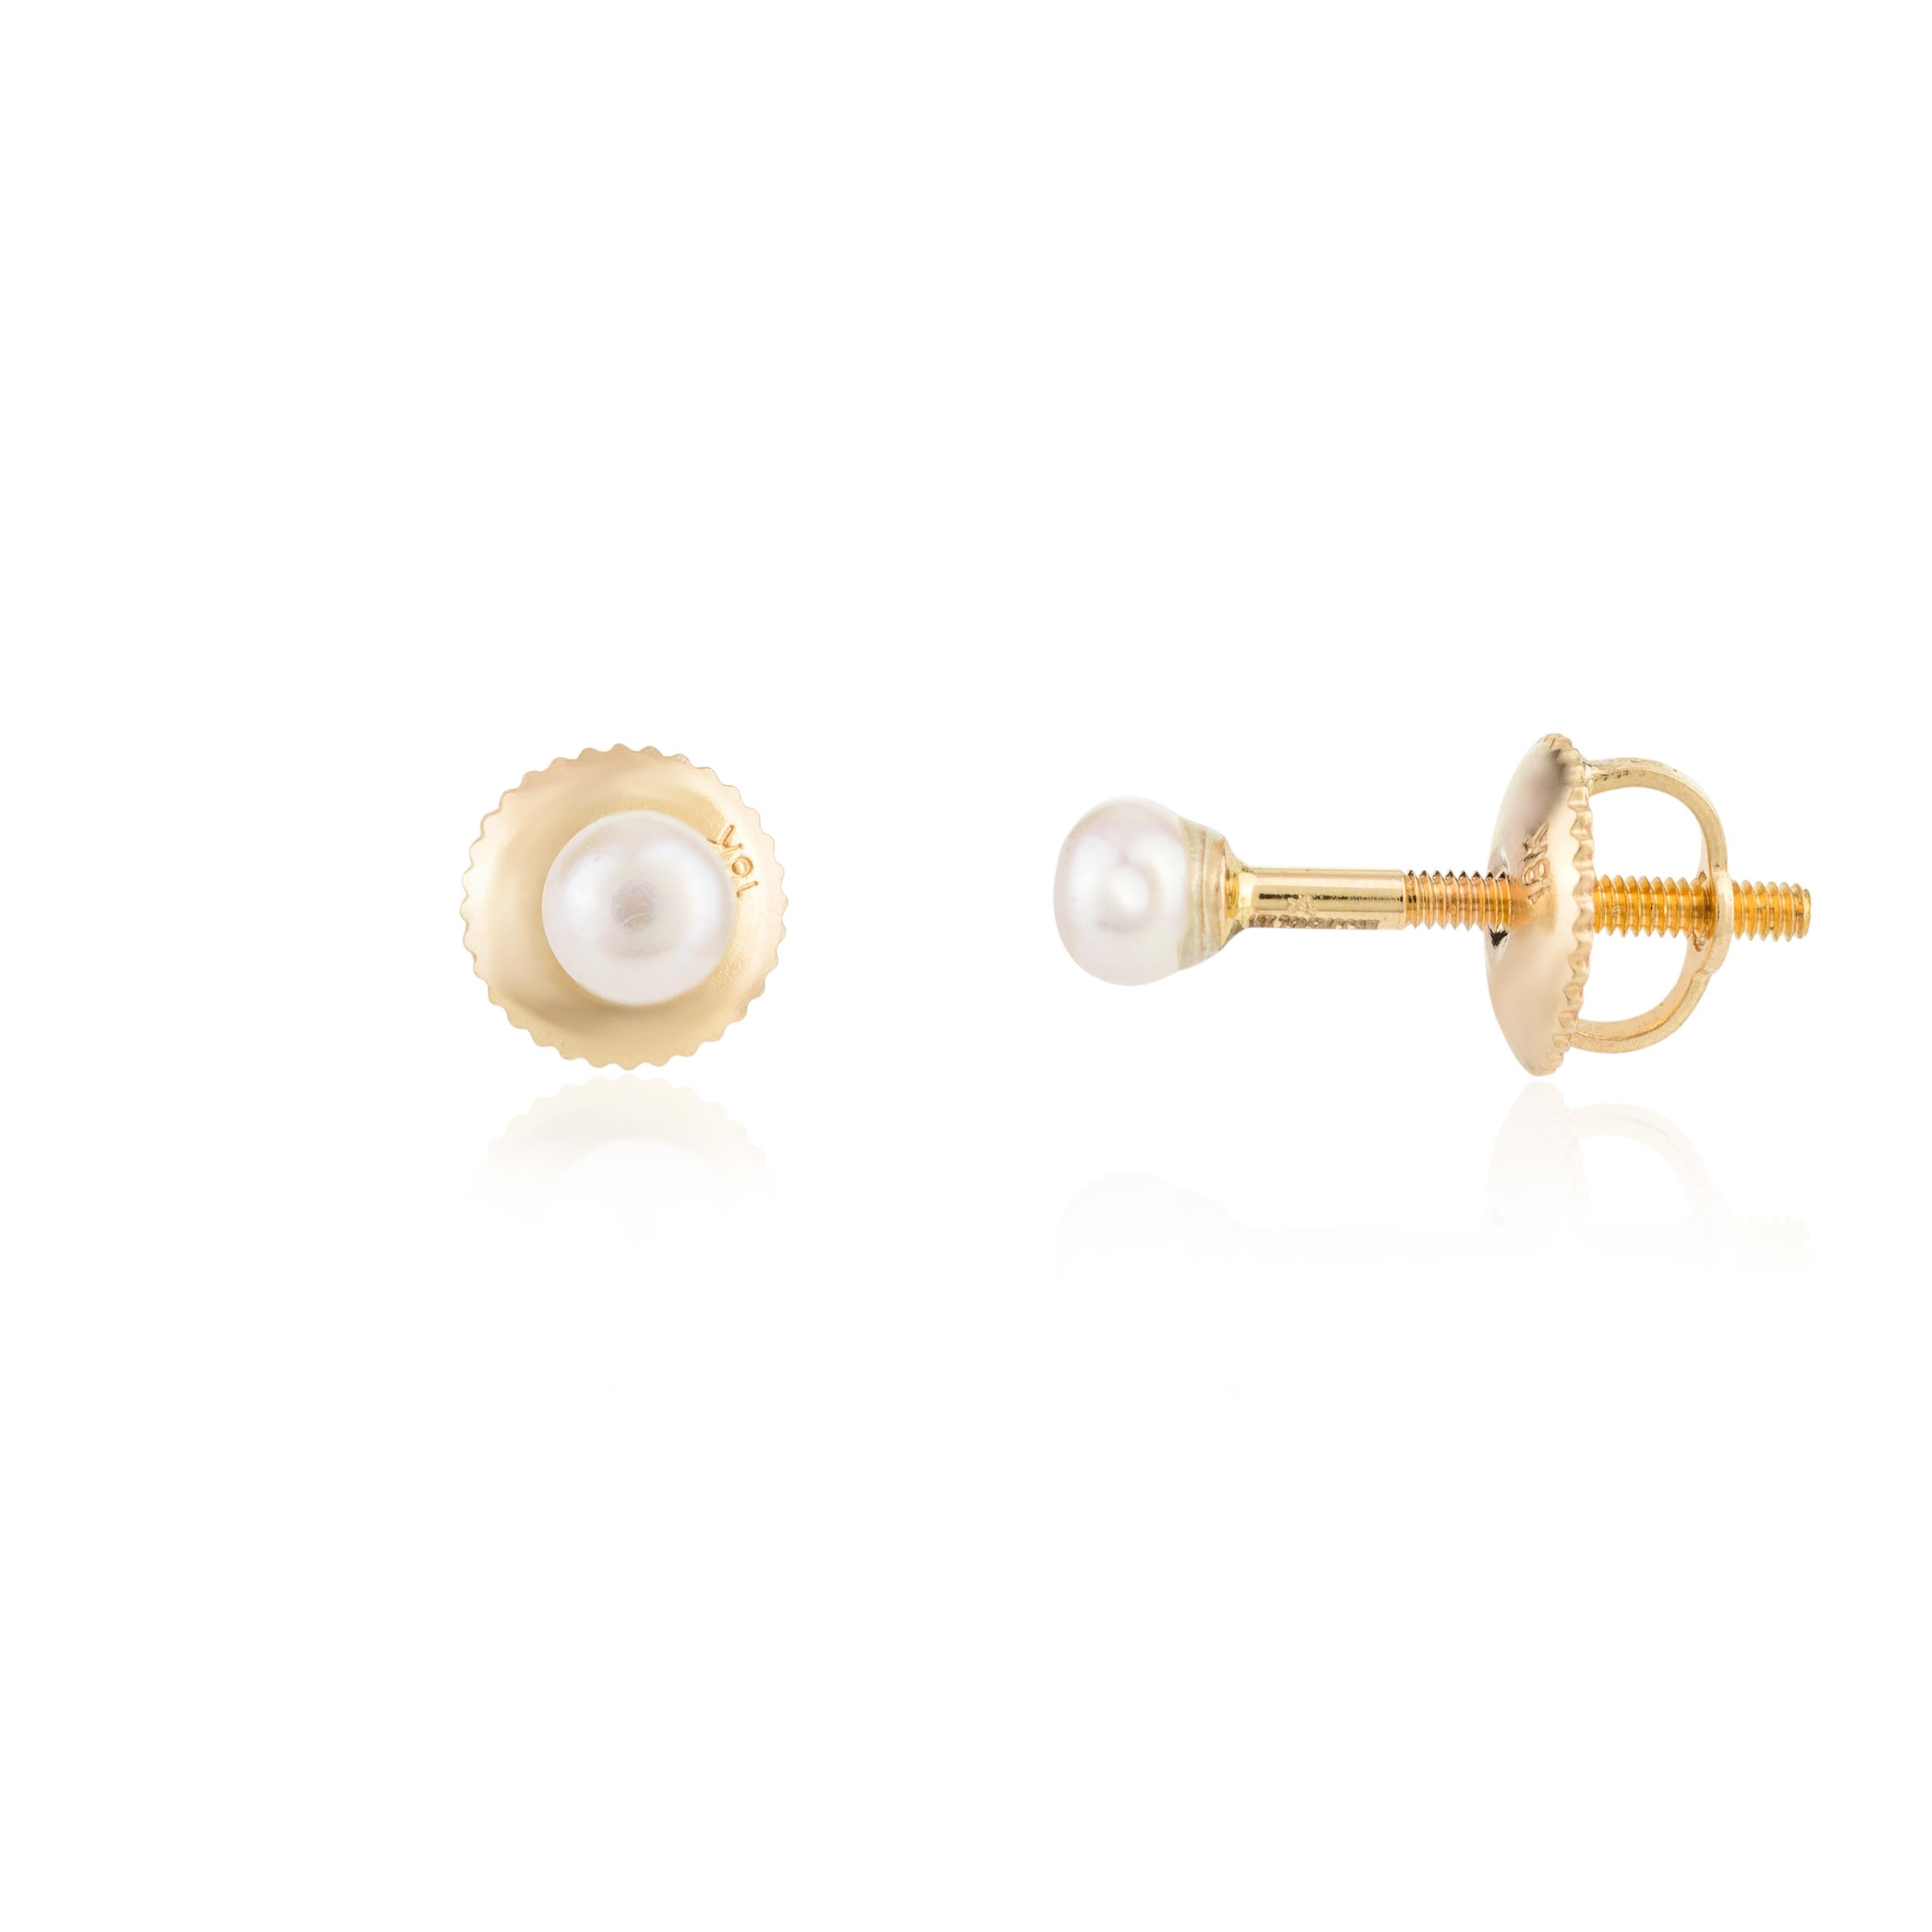 Dainty Everyday Pearl Stud Earrings in 18k Solid Yellow Gold Minimalist Jewelry In New Condition For Sale In Houston, TX